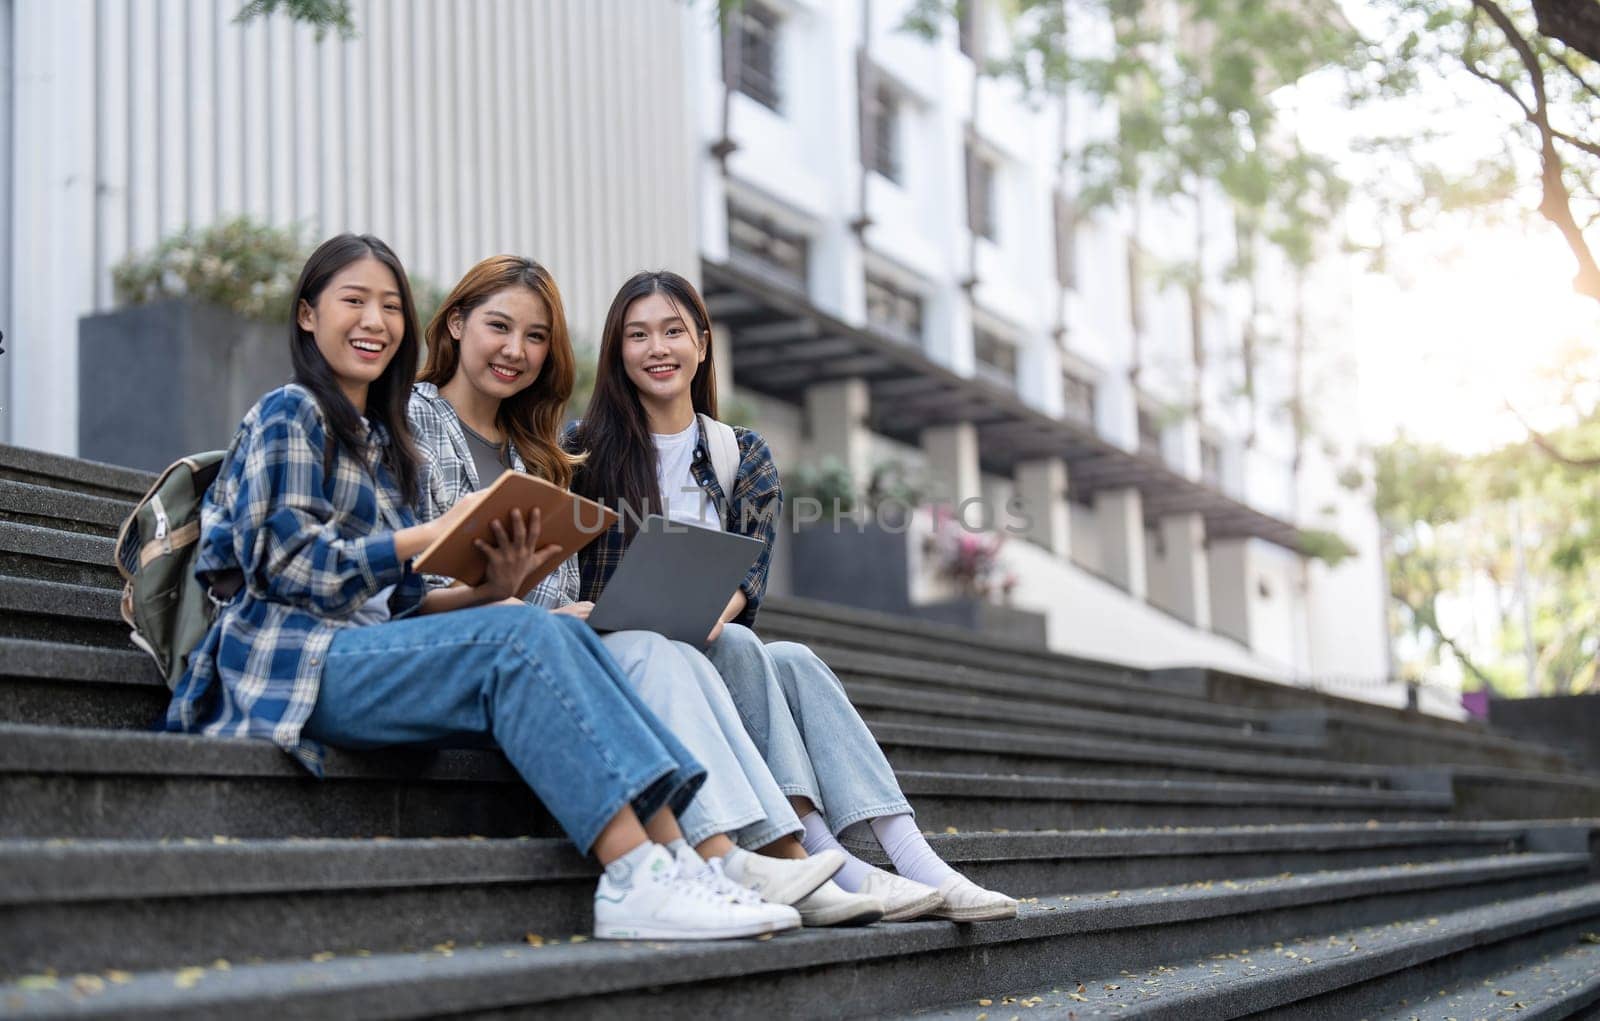 Group of Asian college student reading books and tutoring special class for exam on grass field at outdoors. Happiness and Education learning concept. Back to school concept. Teen and people theme...